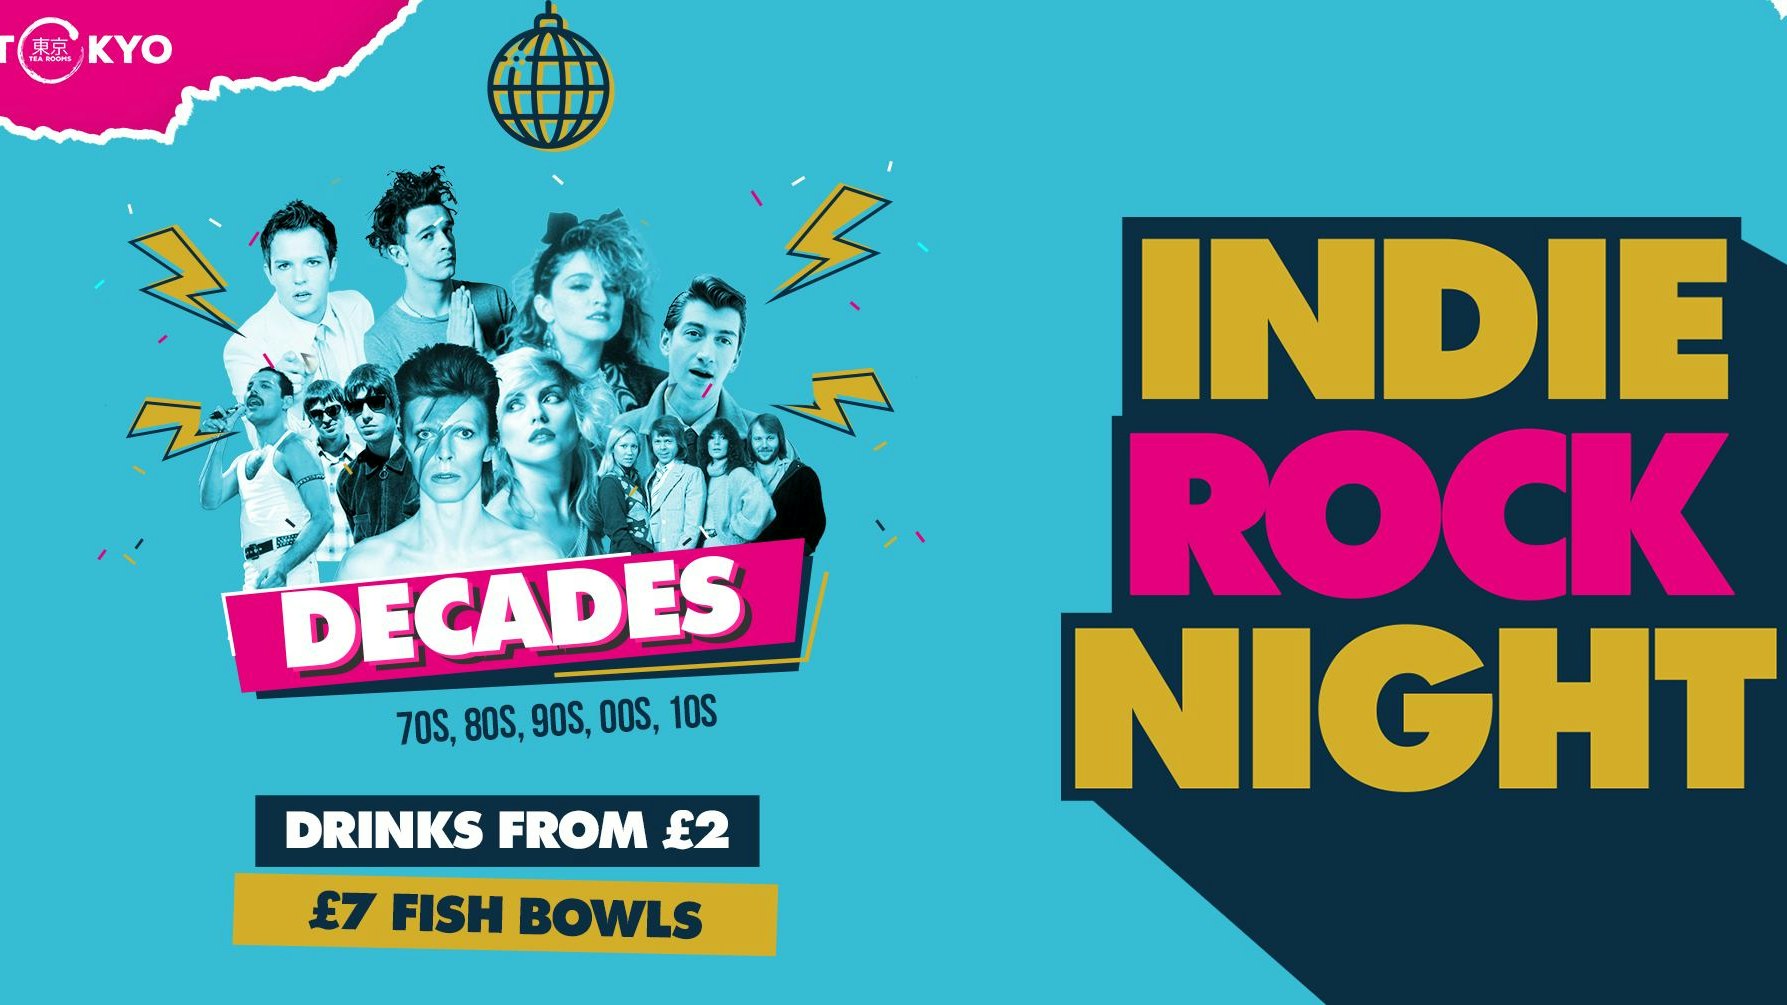 Indie Rock Night ∙ DECADES (60s, 70s, 80s, 90s, 00s, 10s) *ONLY 7 £3 TICKETS LEFT*